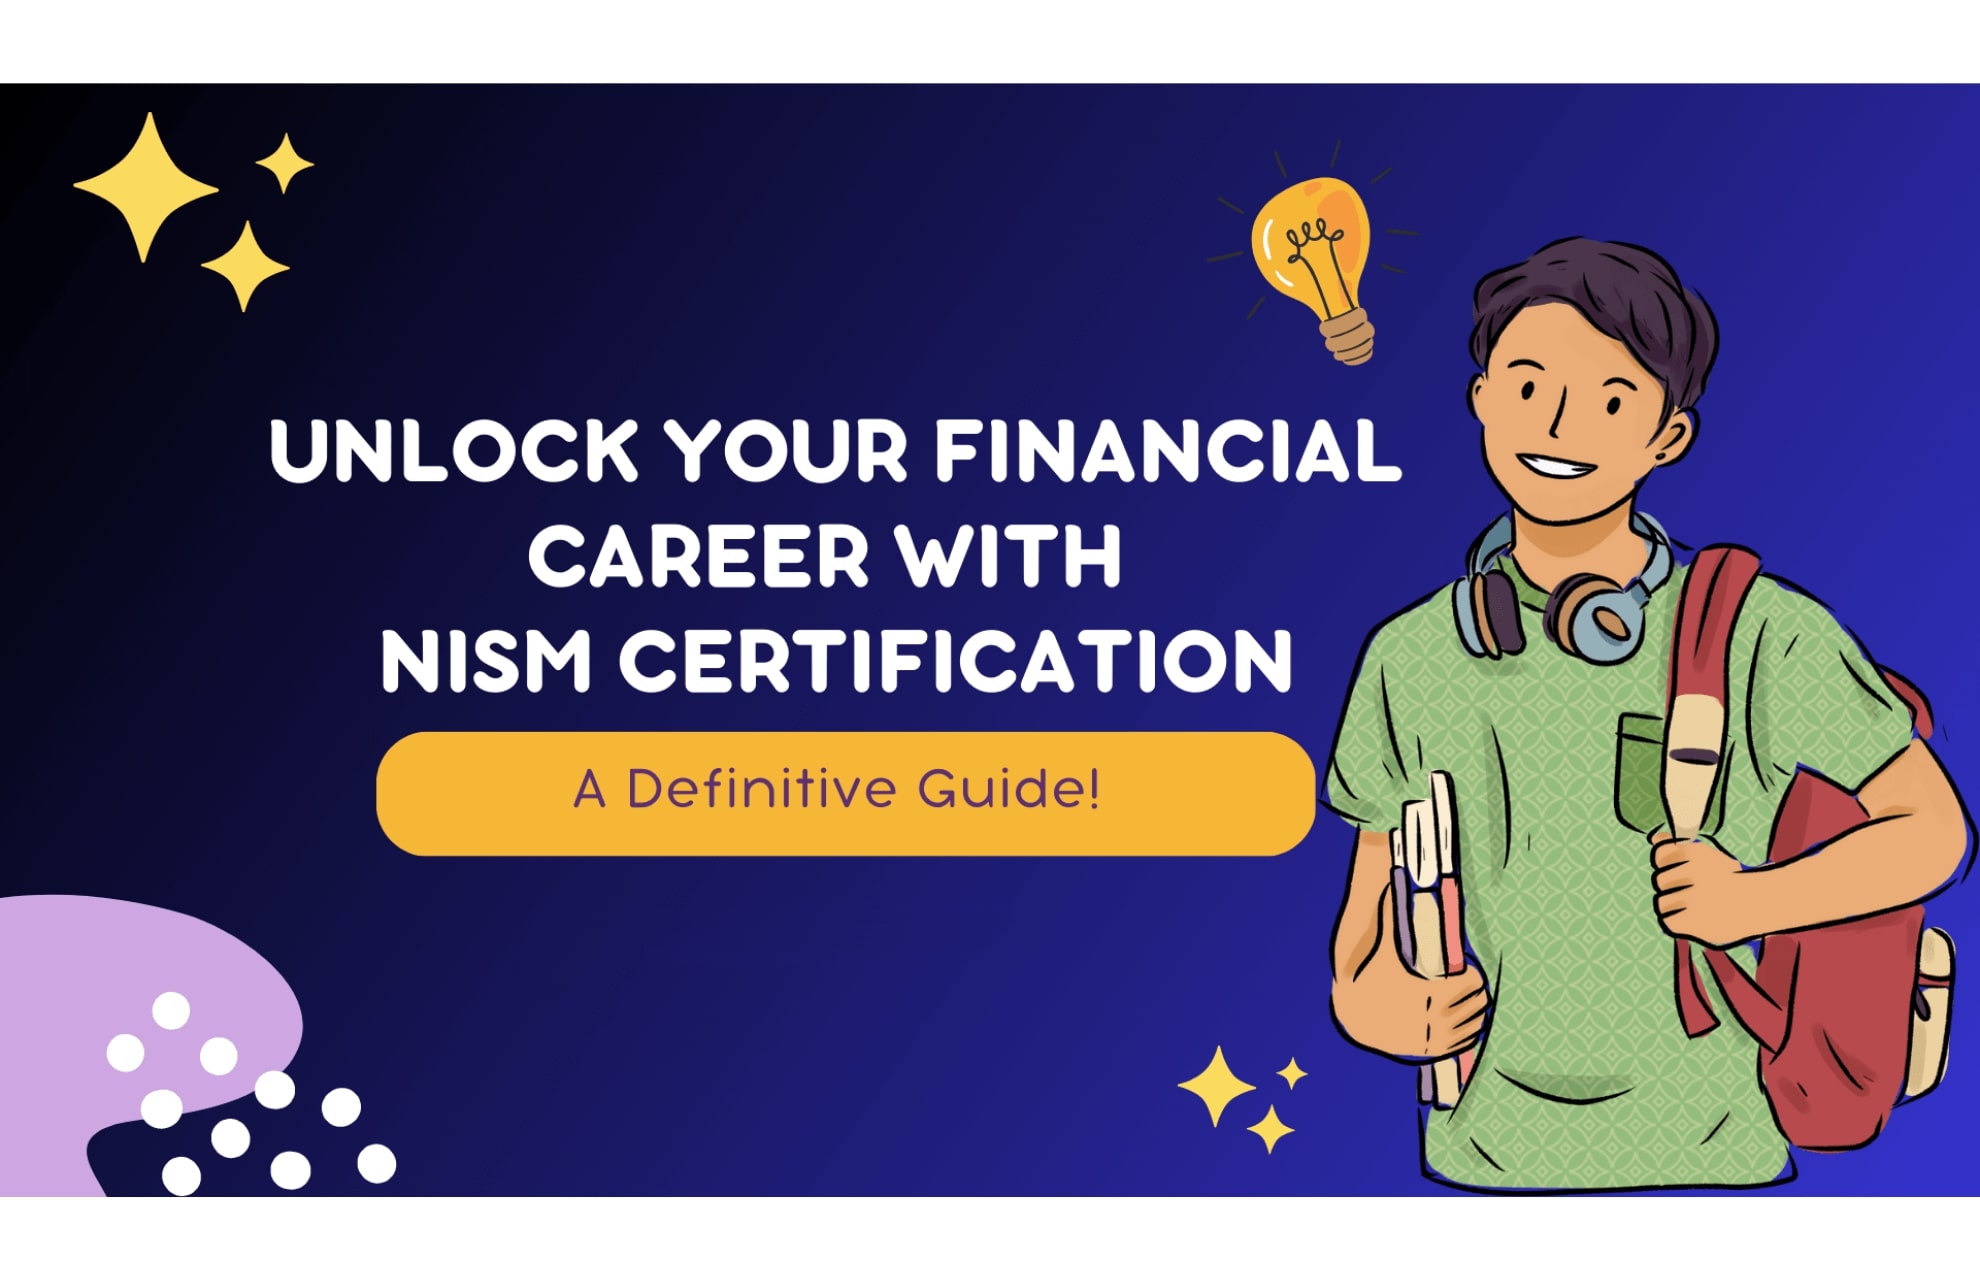 Unlock Your Financial Career with NISM Certification